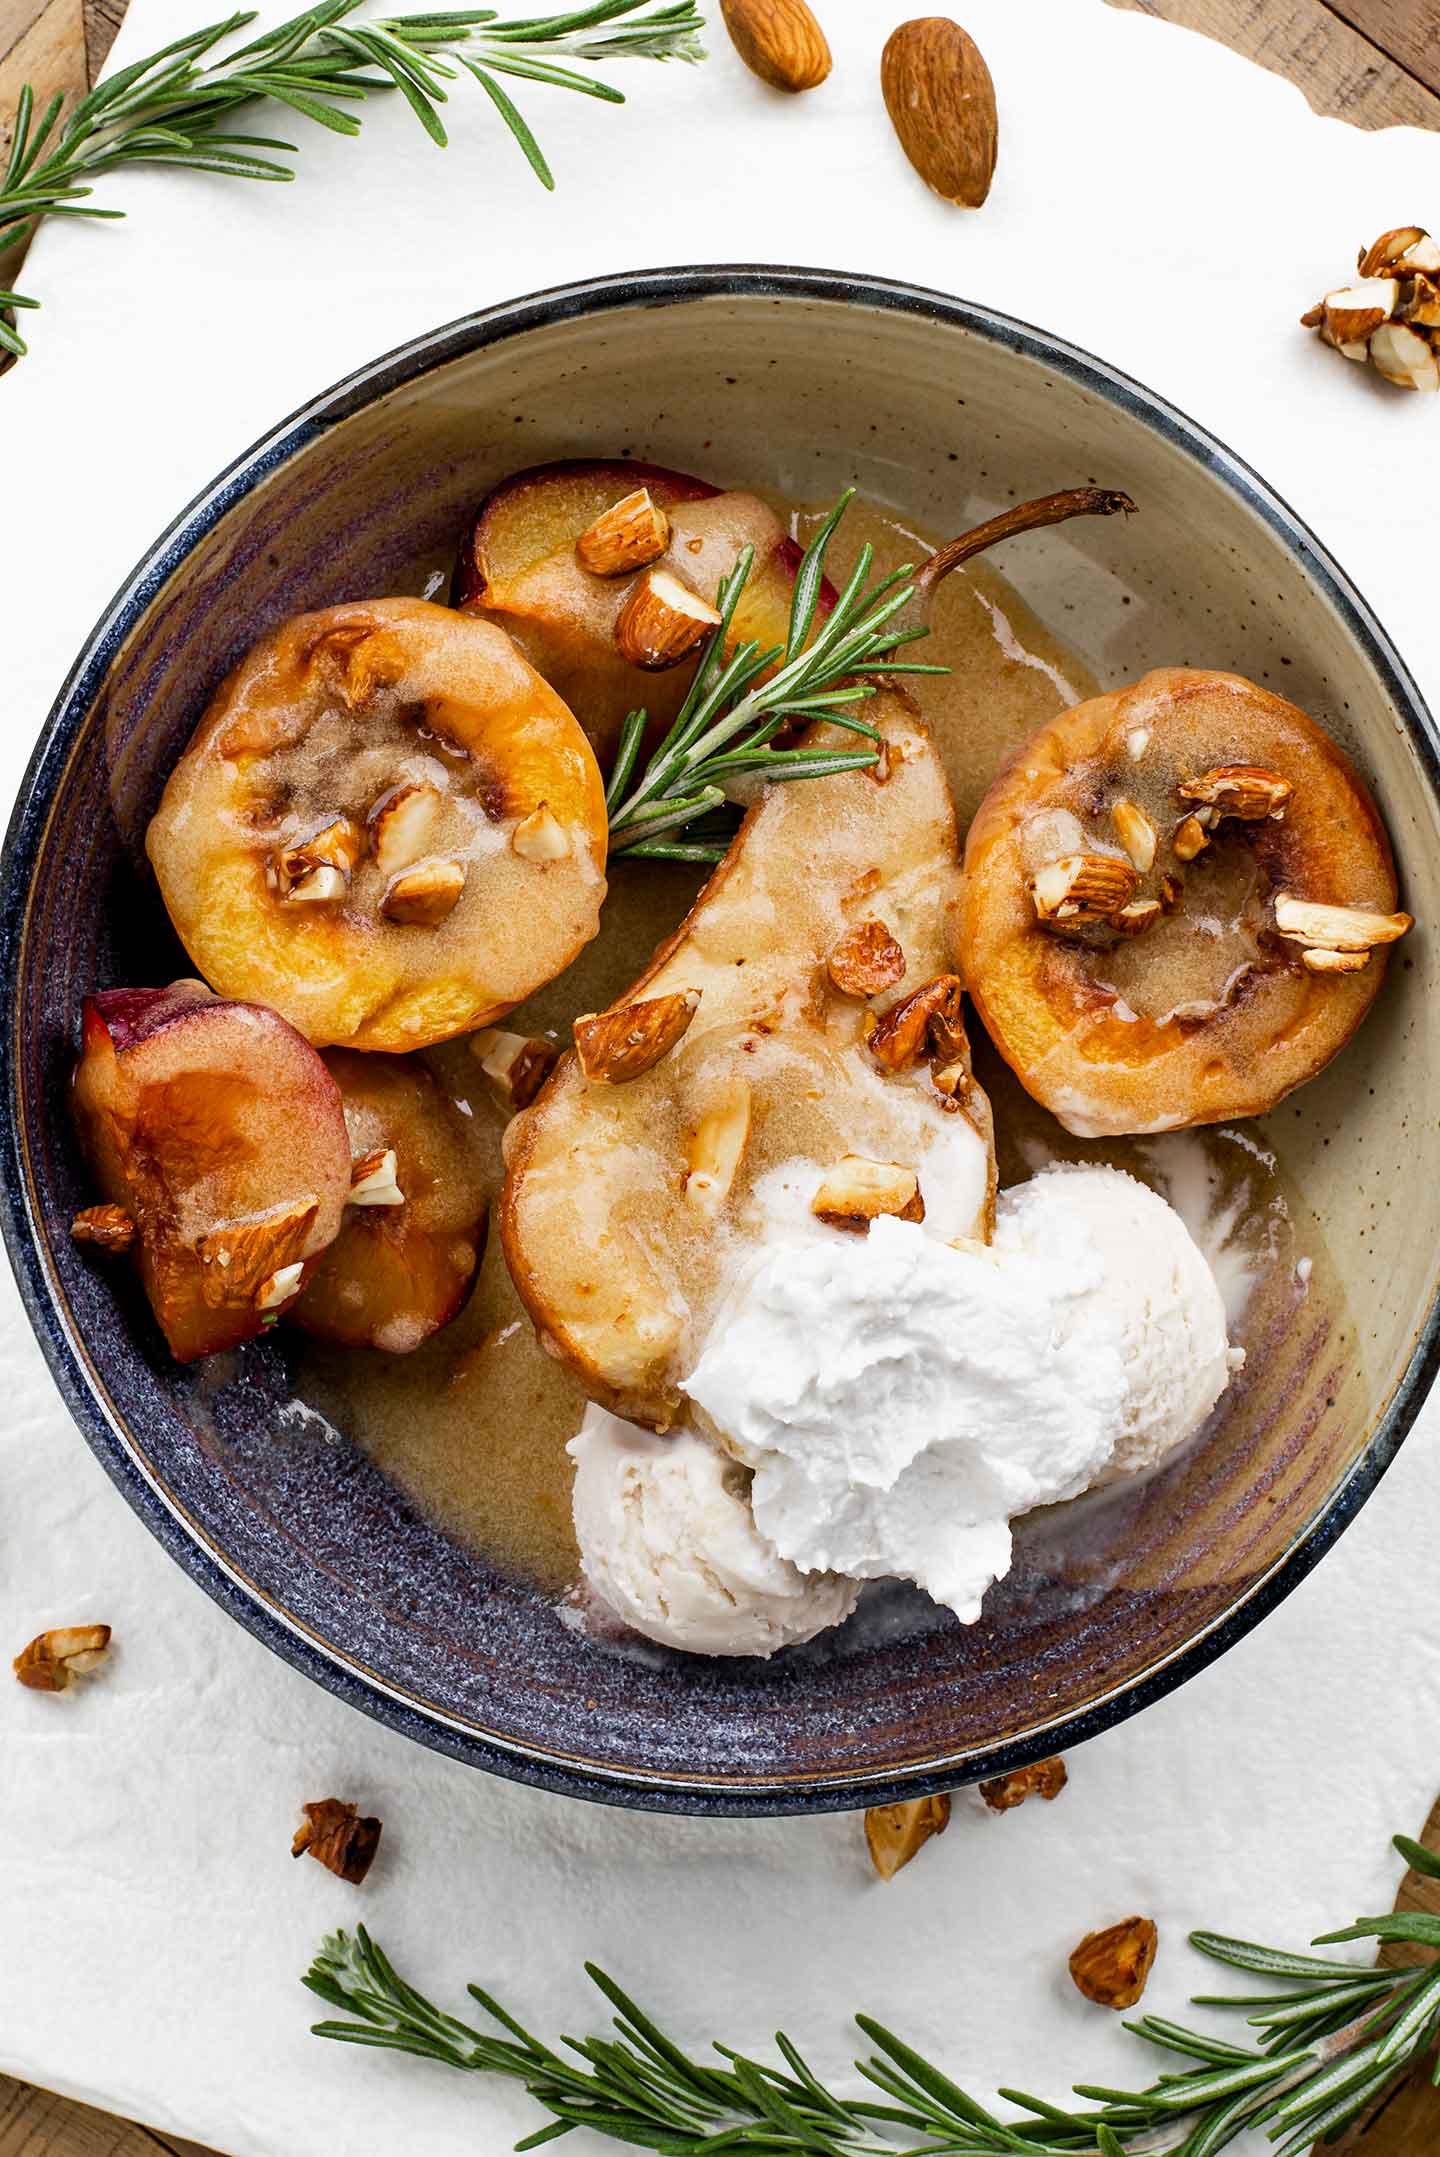 Top down view of a dish with a golden baked pear and stone fruit dessert, drizzled with syrup, garnished with rosemary, and accompanied by a scoop of vanilla ice cream and whipped cream.